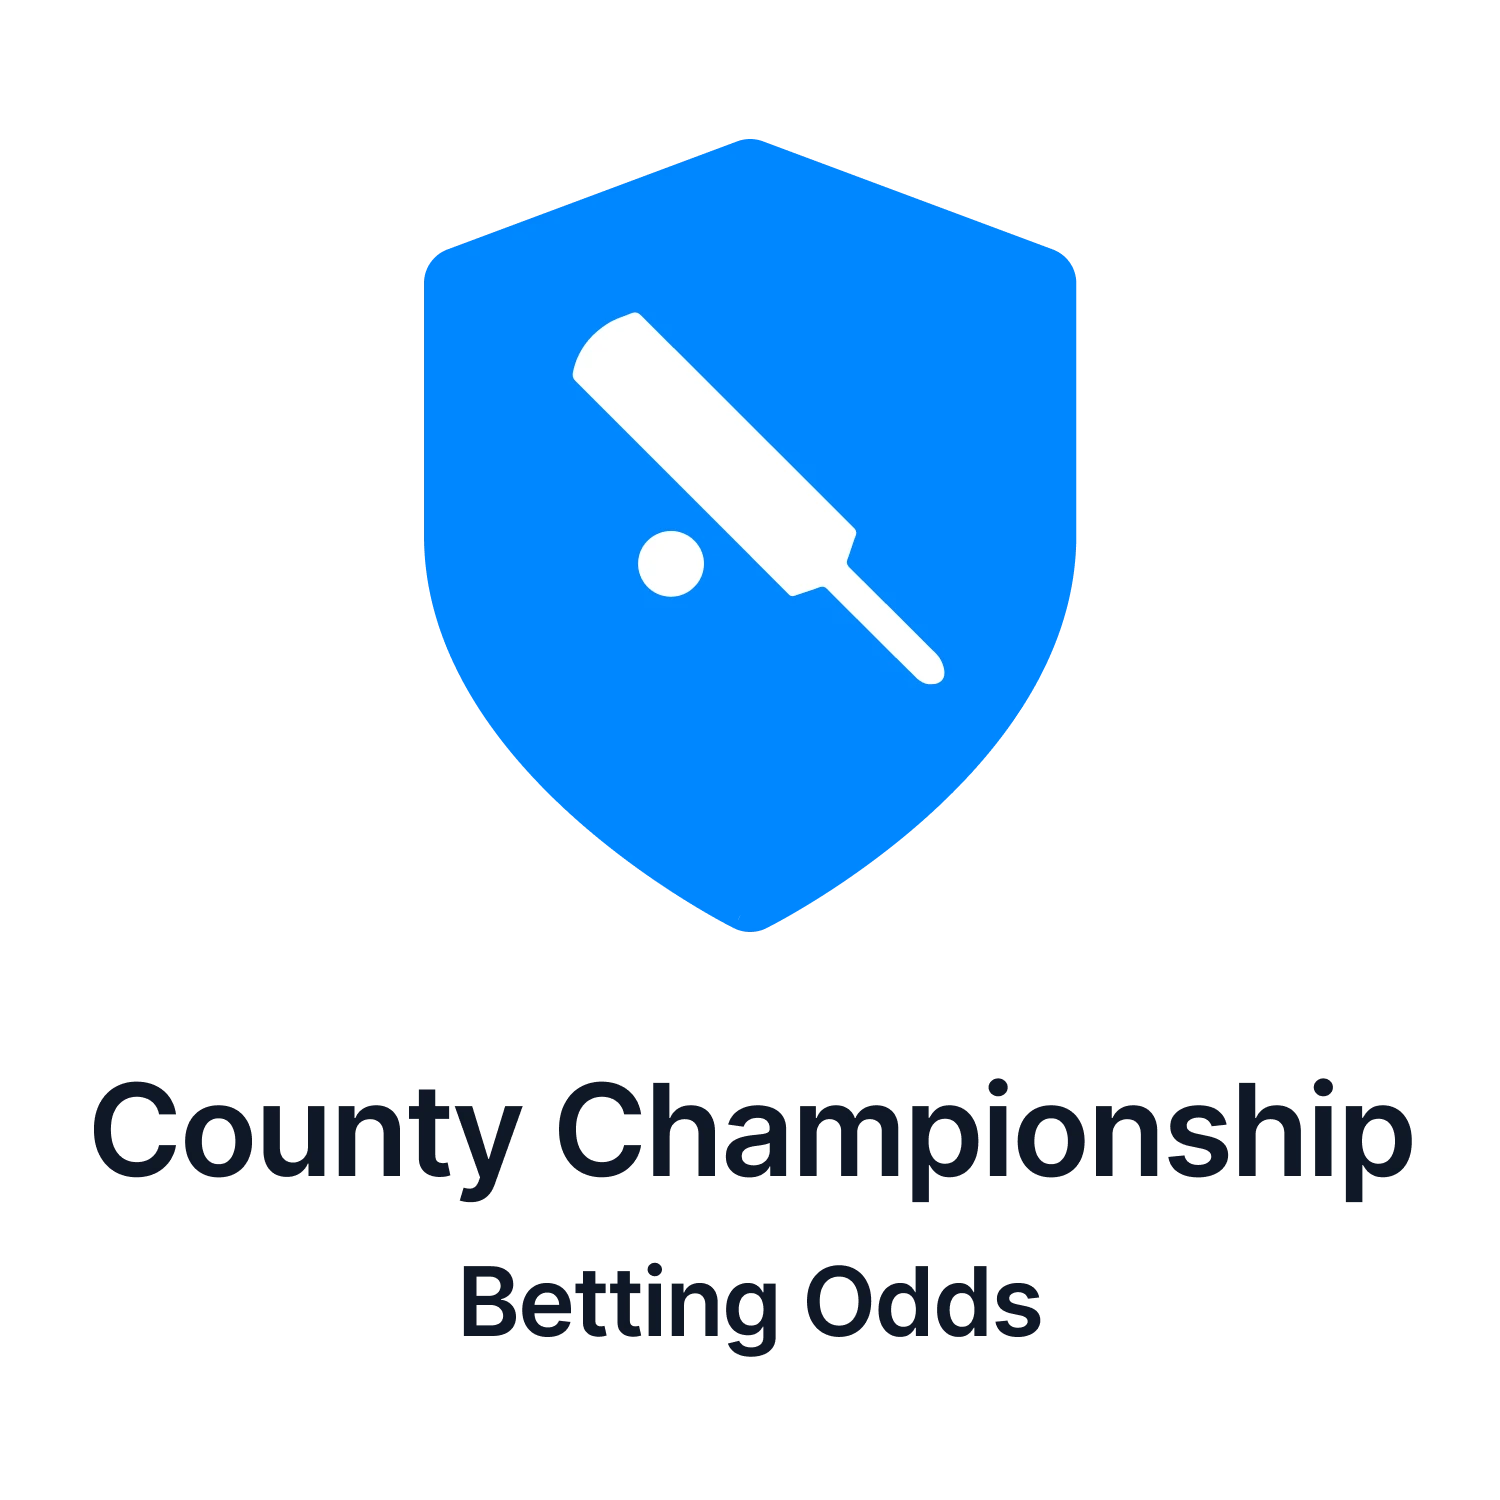 The odds for County Championship are here.